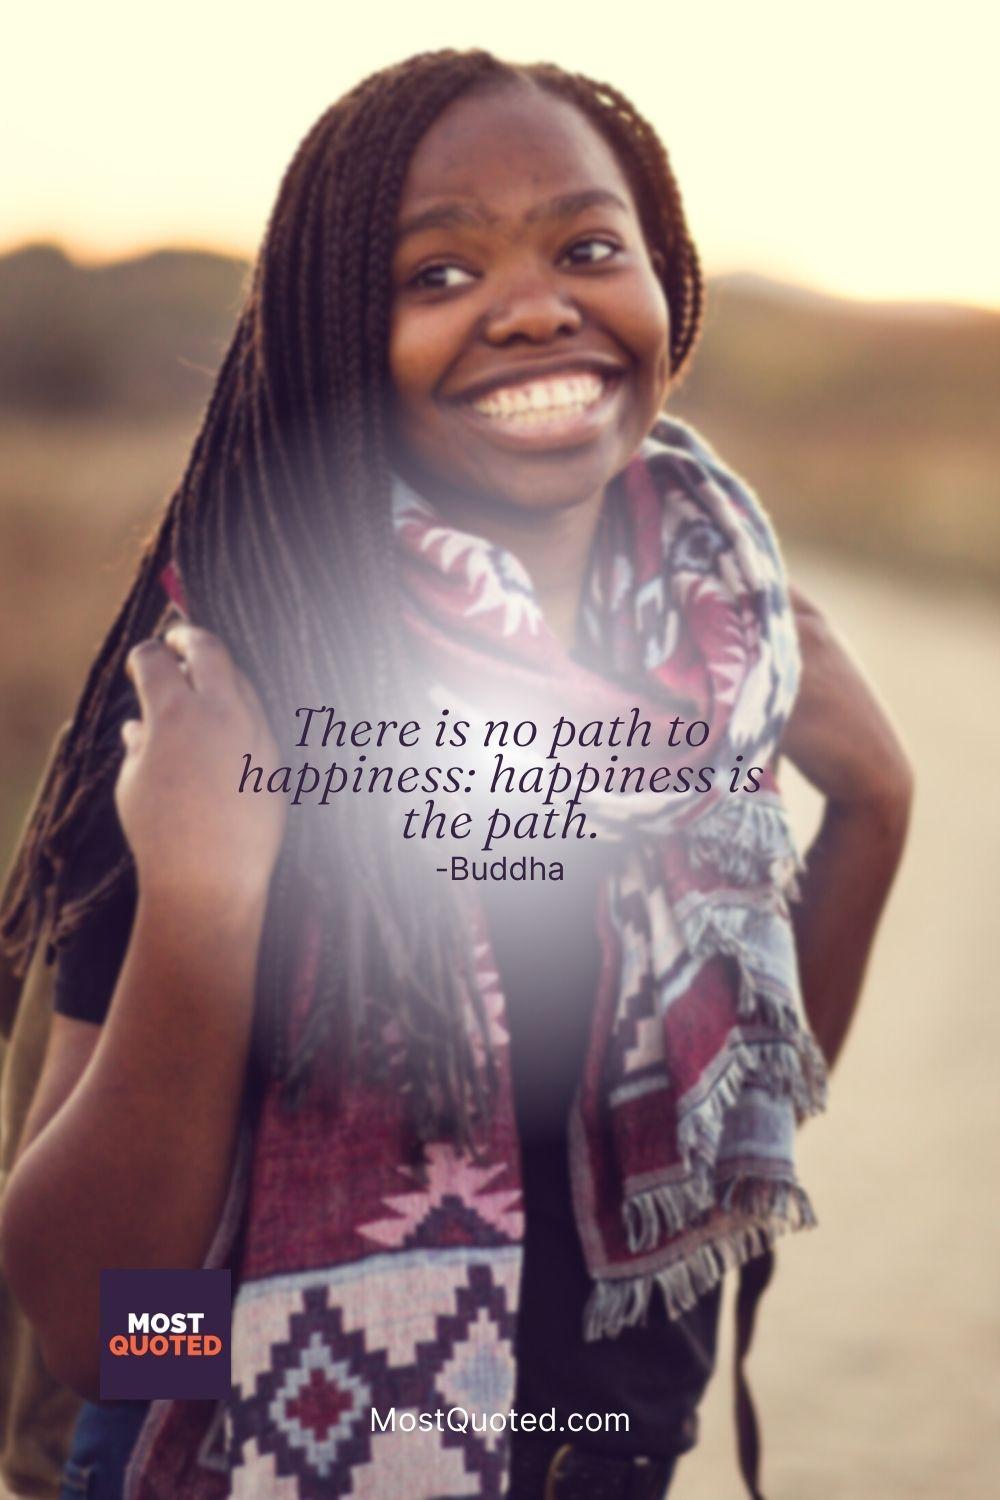 There is no path to happiness: happiness is the path. - Buddha